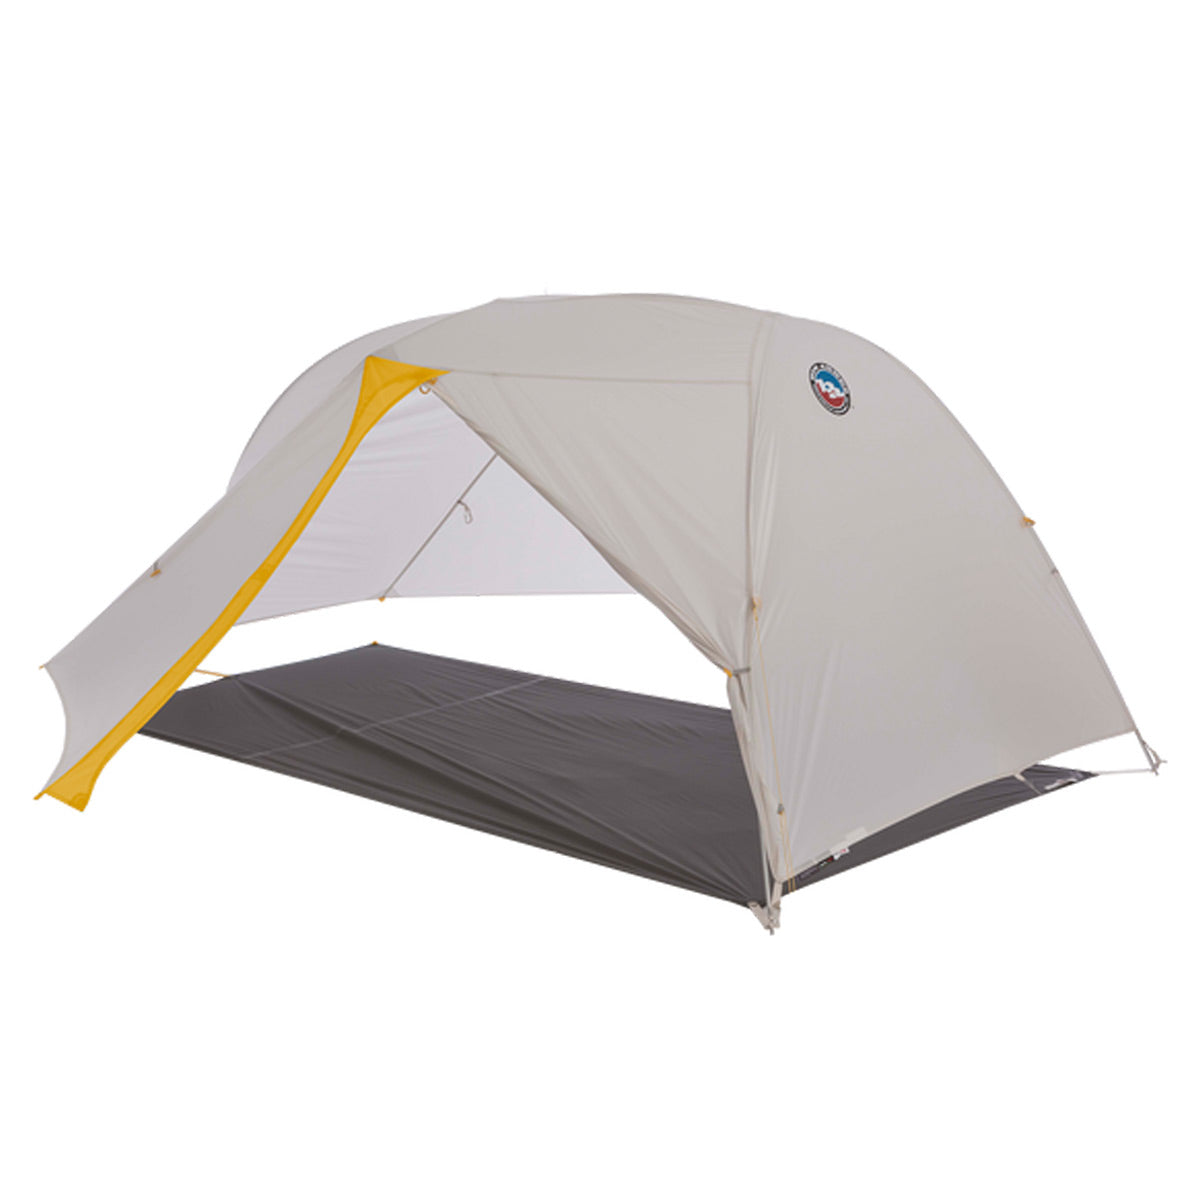 Big Agnes Tiger Wall UL 2 Person Solution Dye Tent